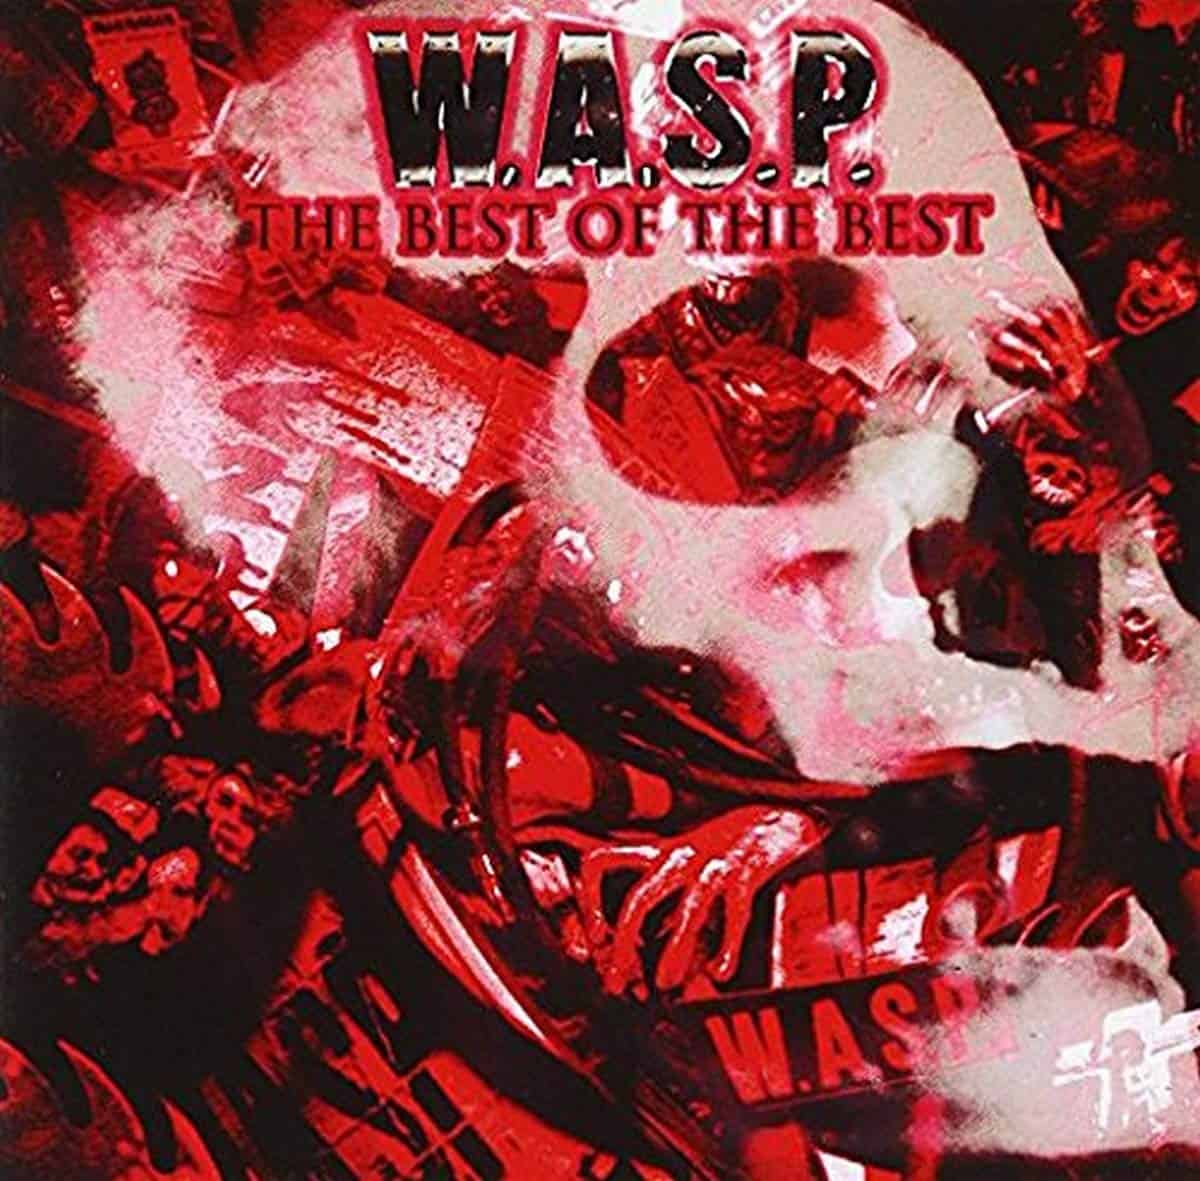 wasp-the-best-of-the-best-vinyl-record-album-front